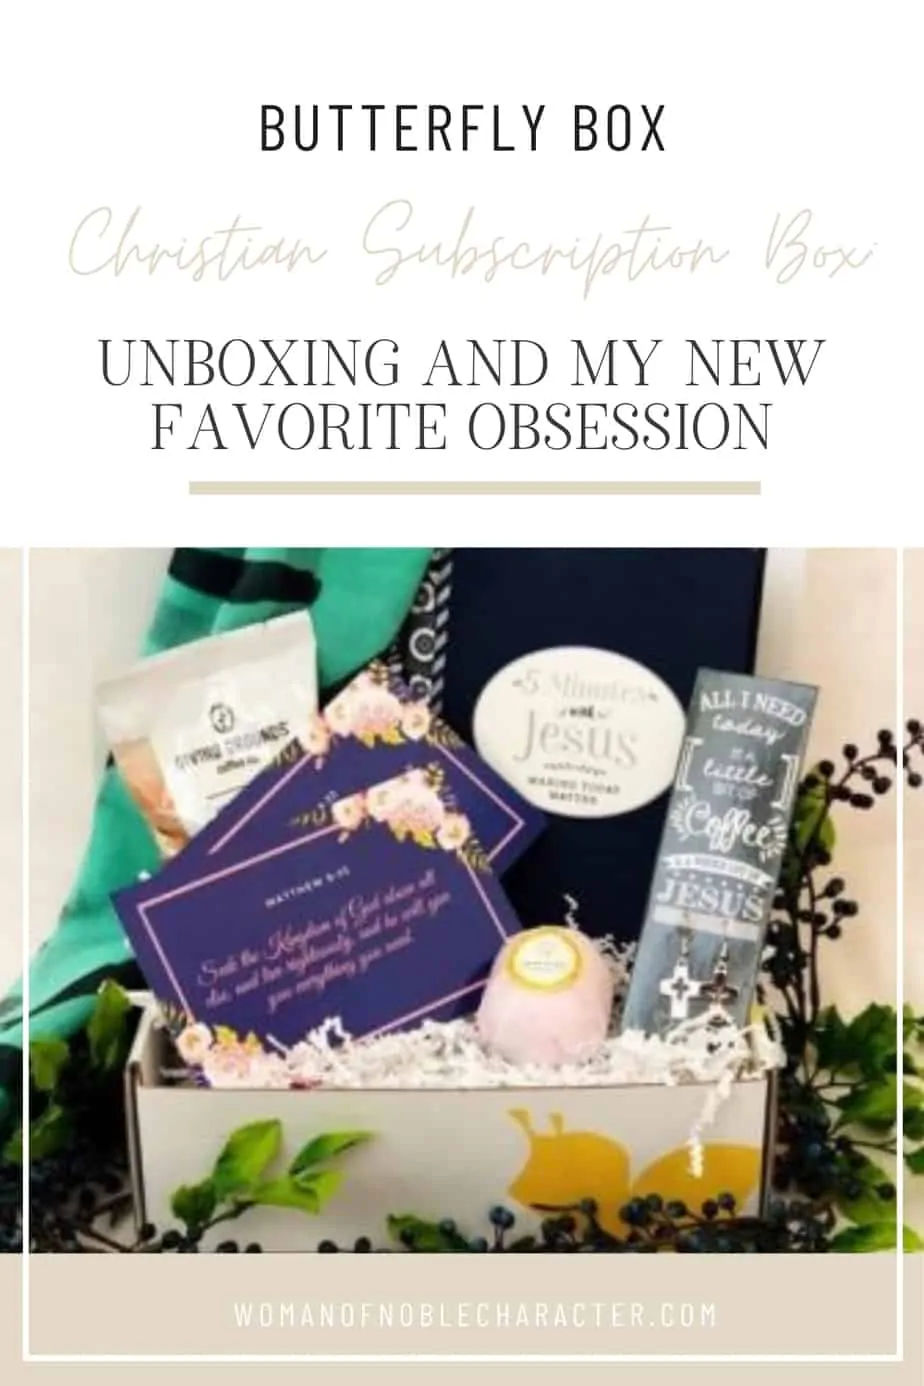 An image of one of the butterfly box subscription boxes with the title, "Butterfly Box Christian Subscription Box: Unboxing and my New Favorite Obsession"